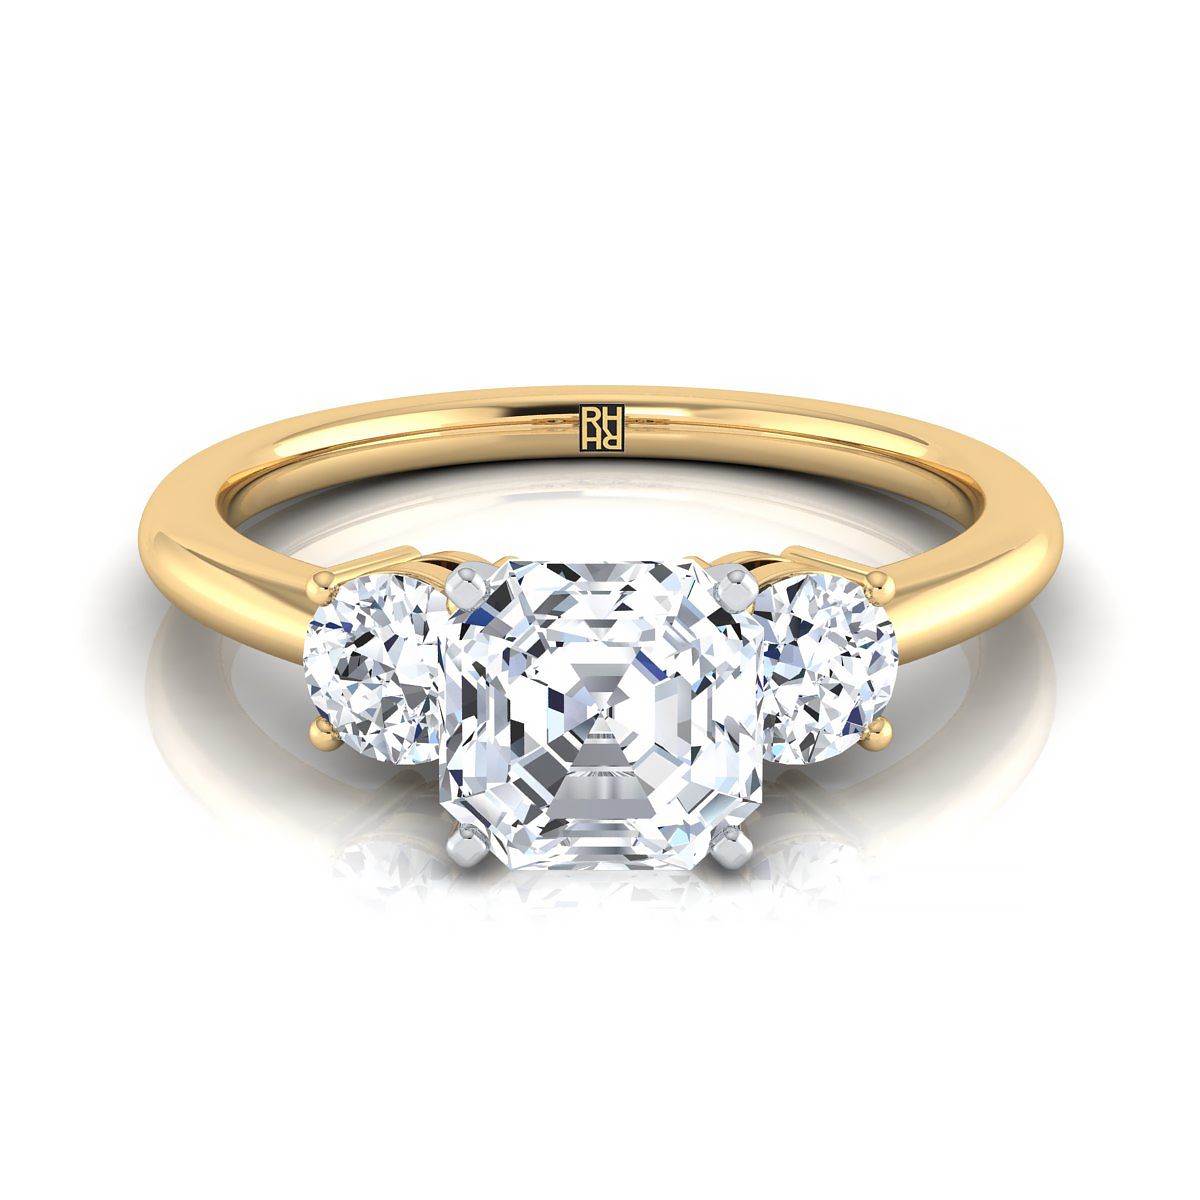 18K Yellow Gold Asscher Cut Diamond Perfectly Matched Round Three Stone Diamond Engagement Ring -1/4ctw